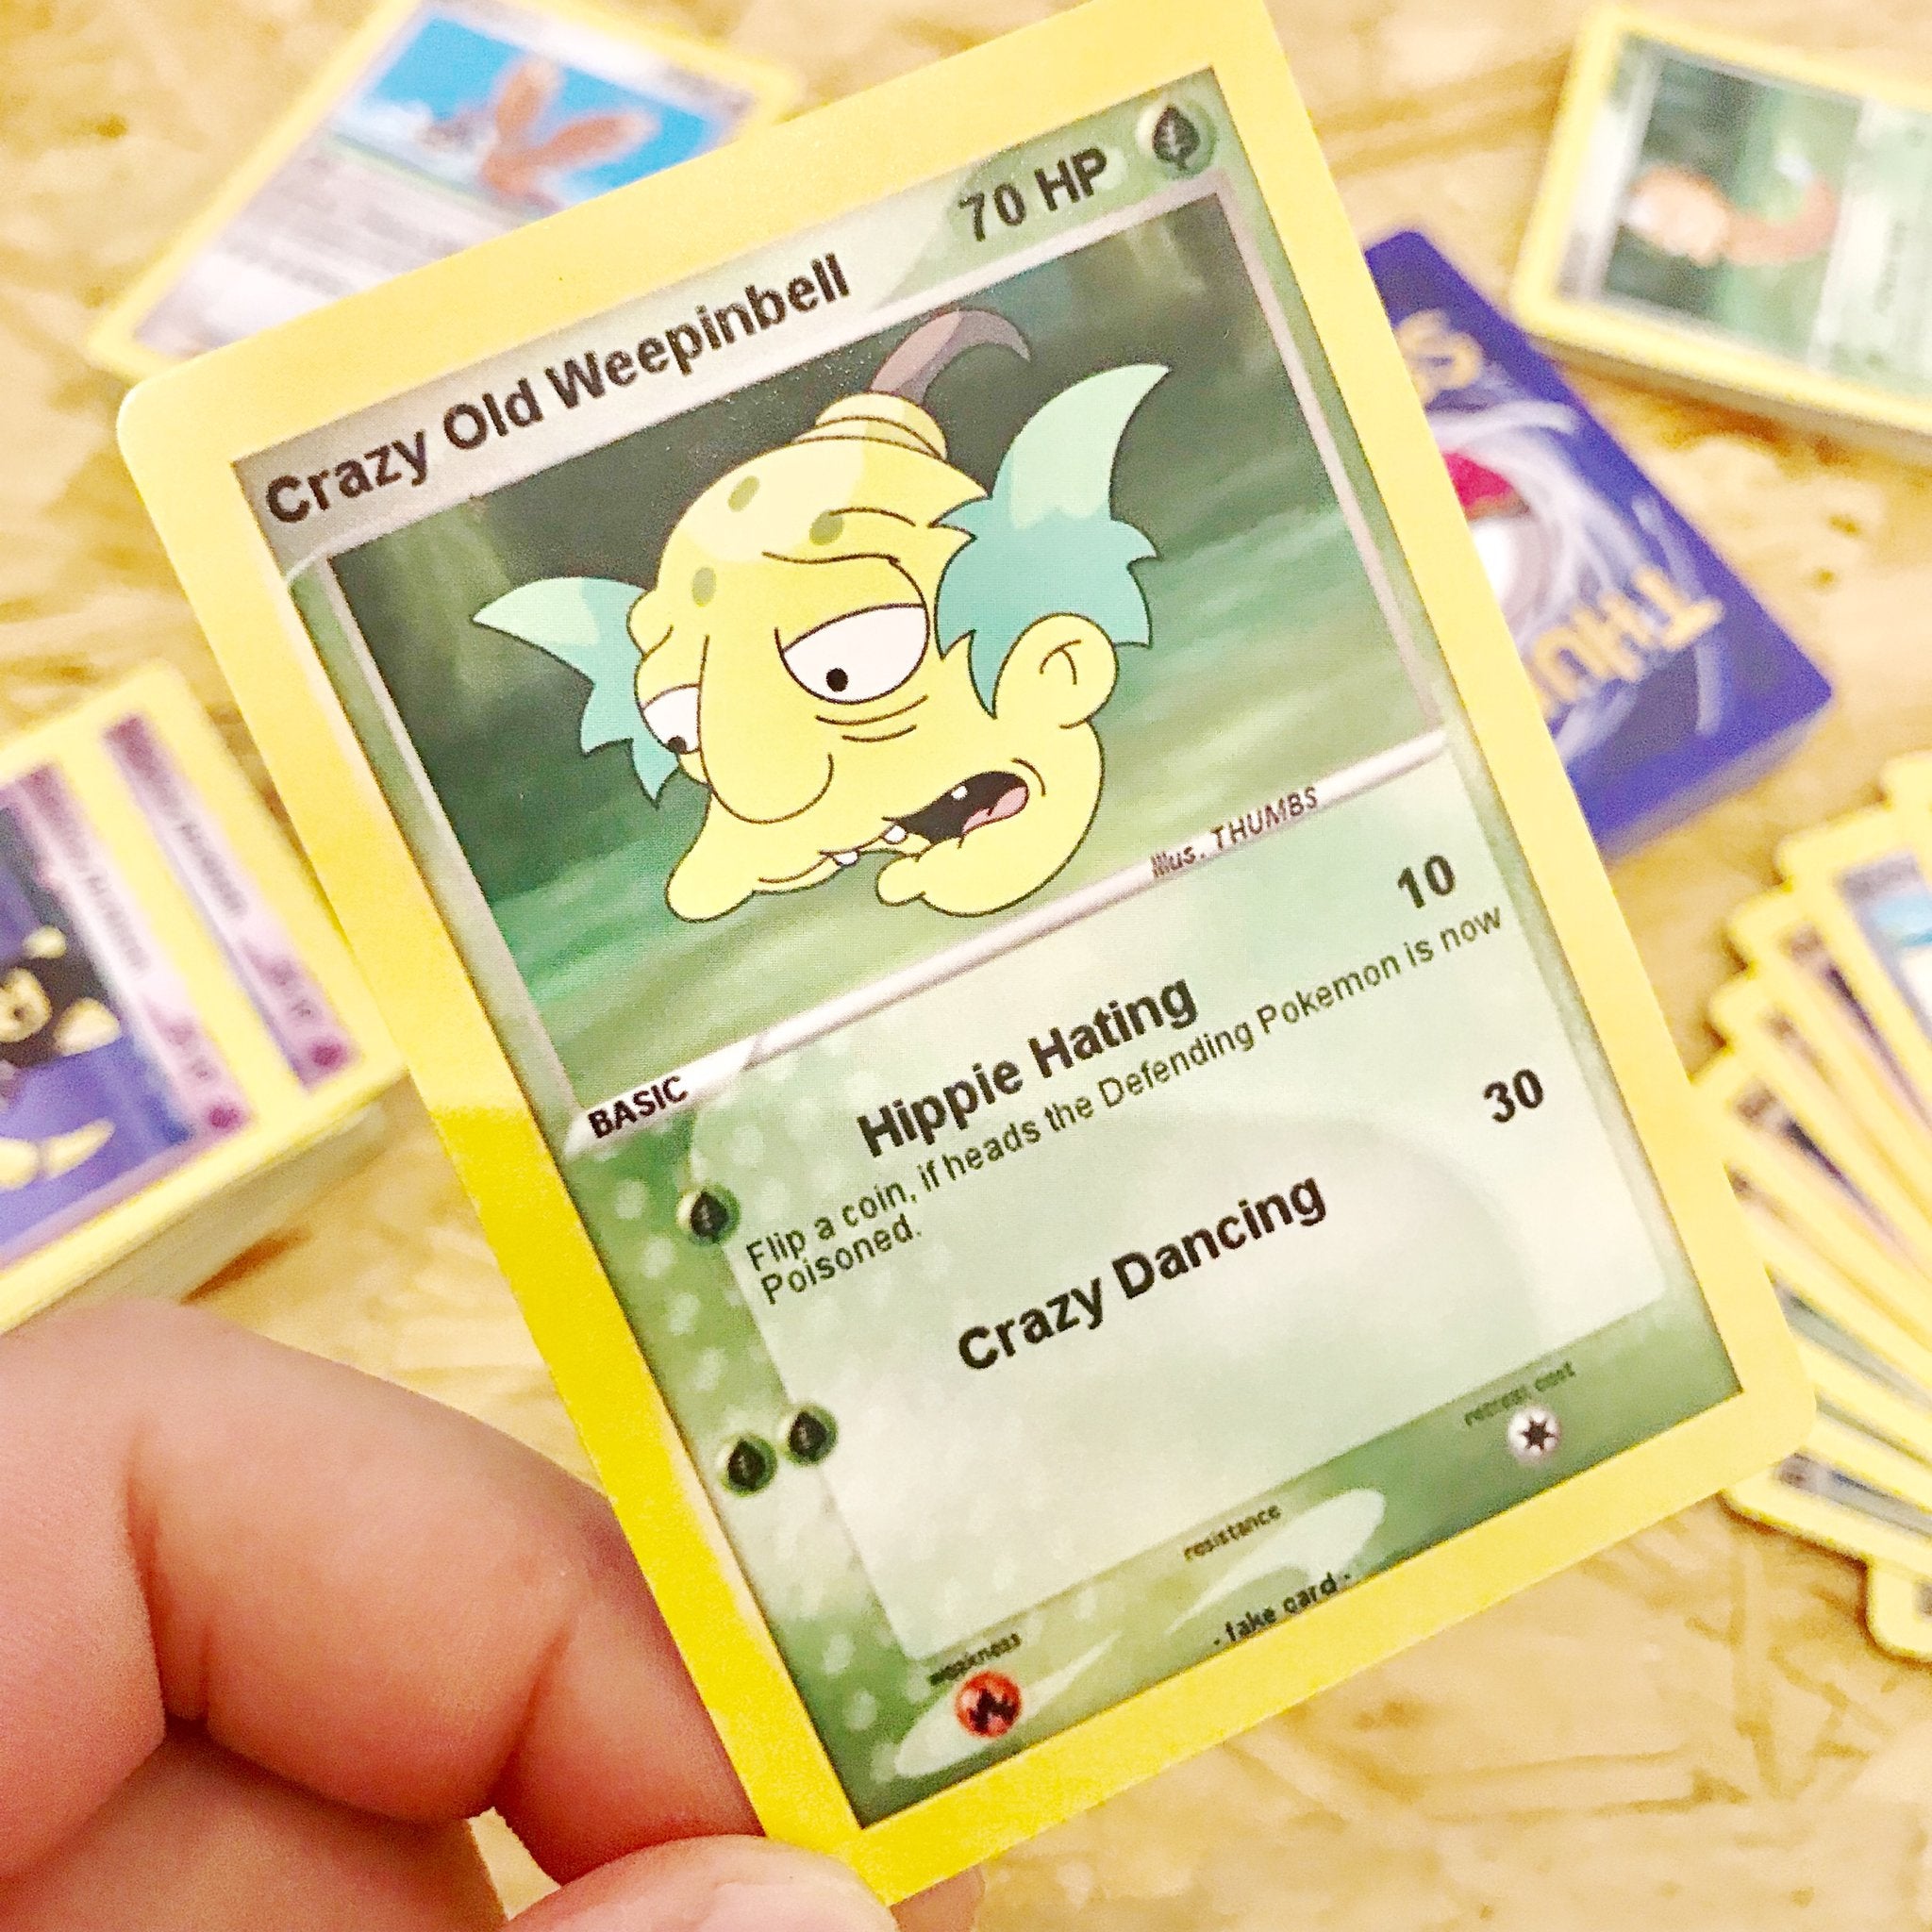 Crazy Old Weepinbell Trading Card